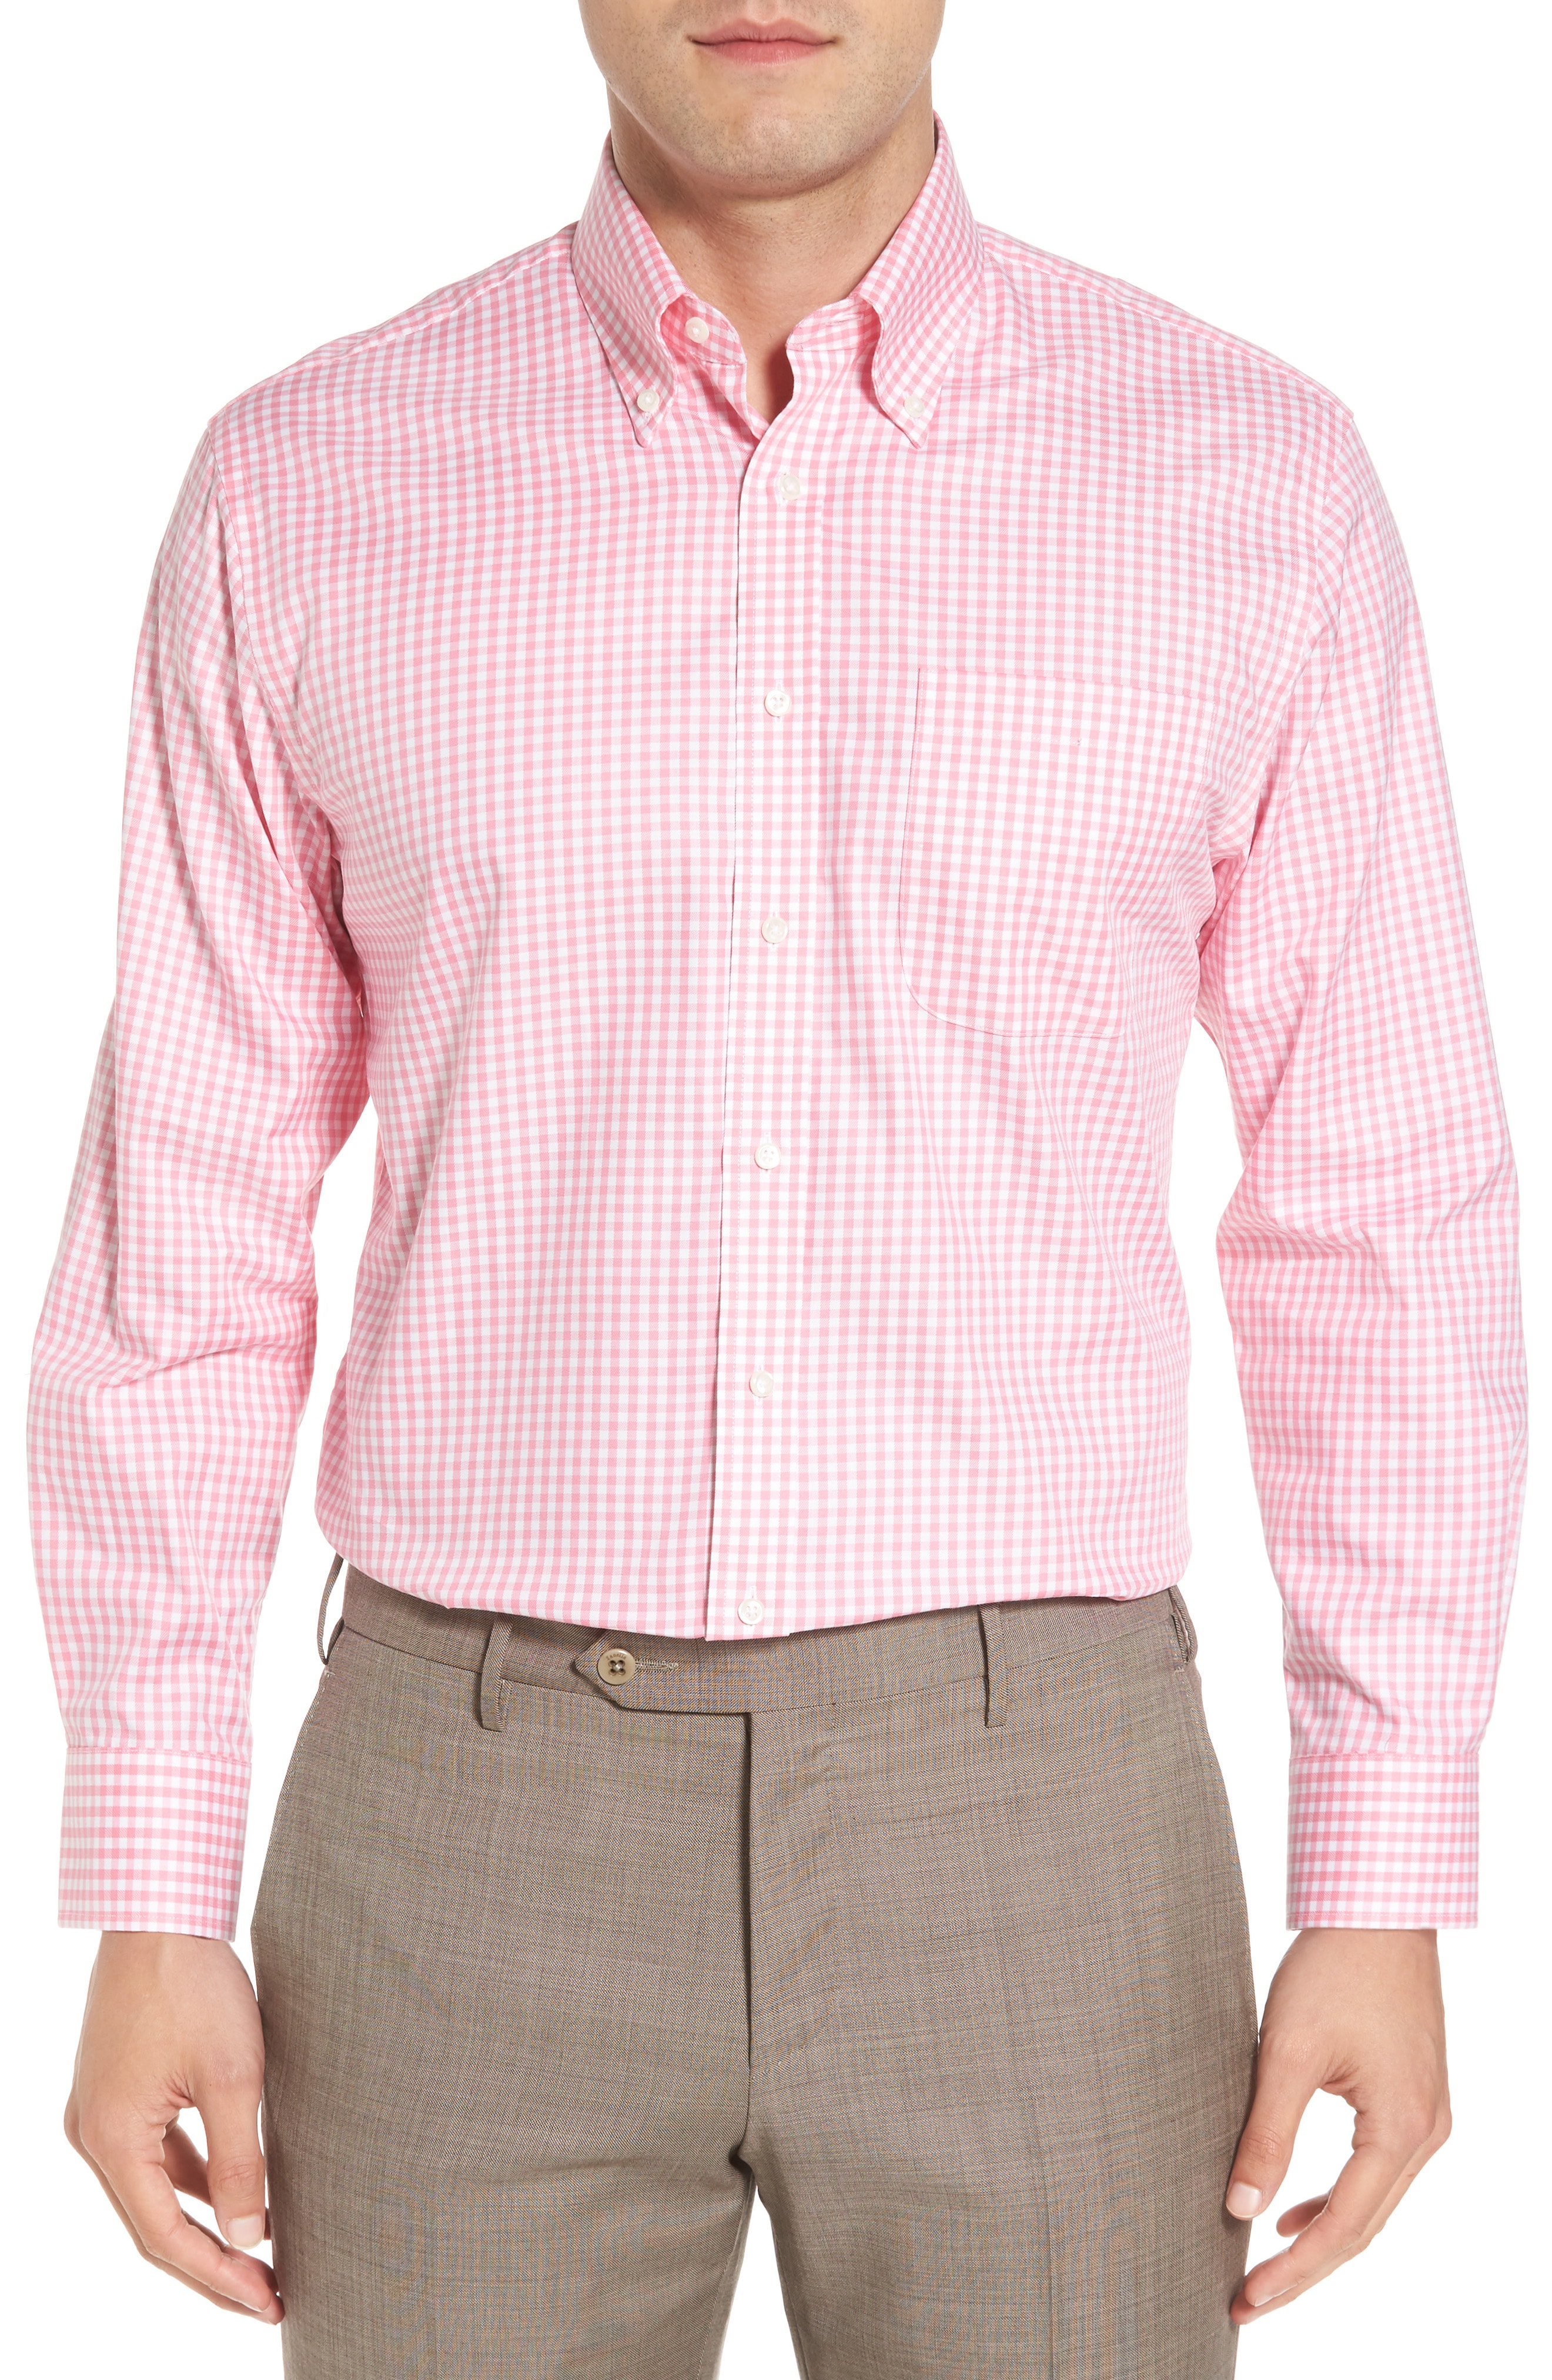 Nordstrom Men's Shop Traditional Fit Non-Iron Gingham Dress Shirt